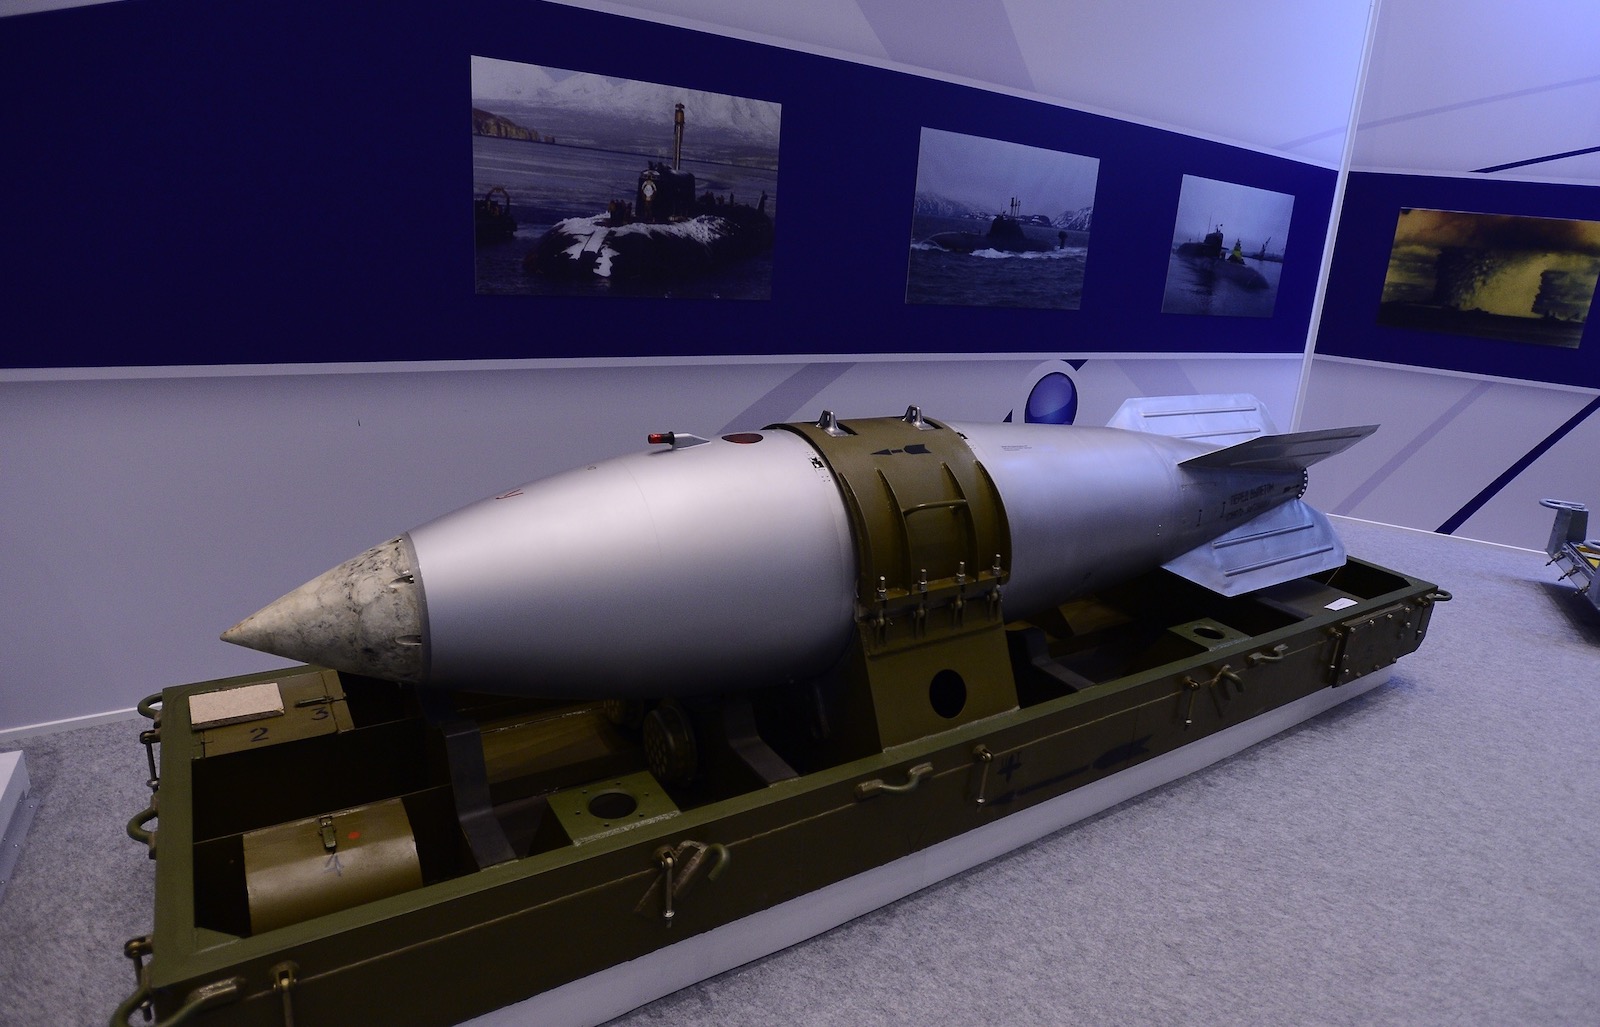 A deactivated nuclear bomb on display